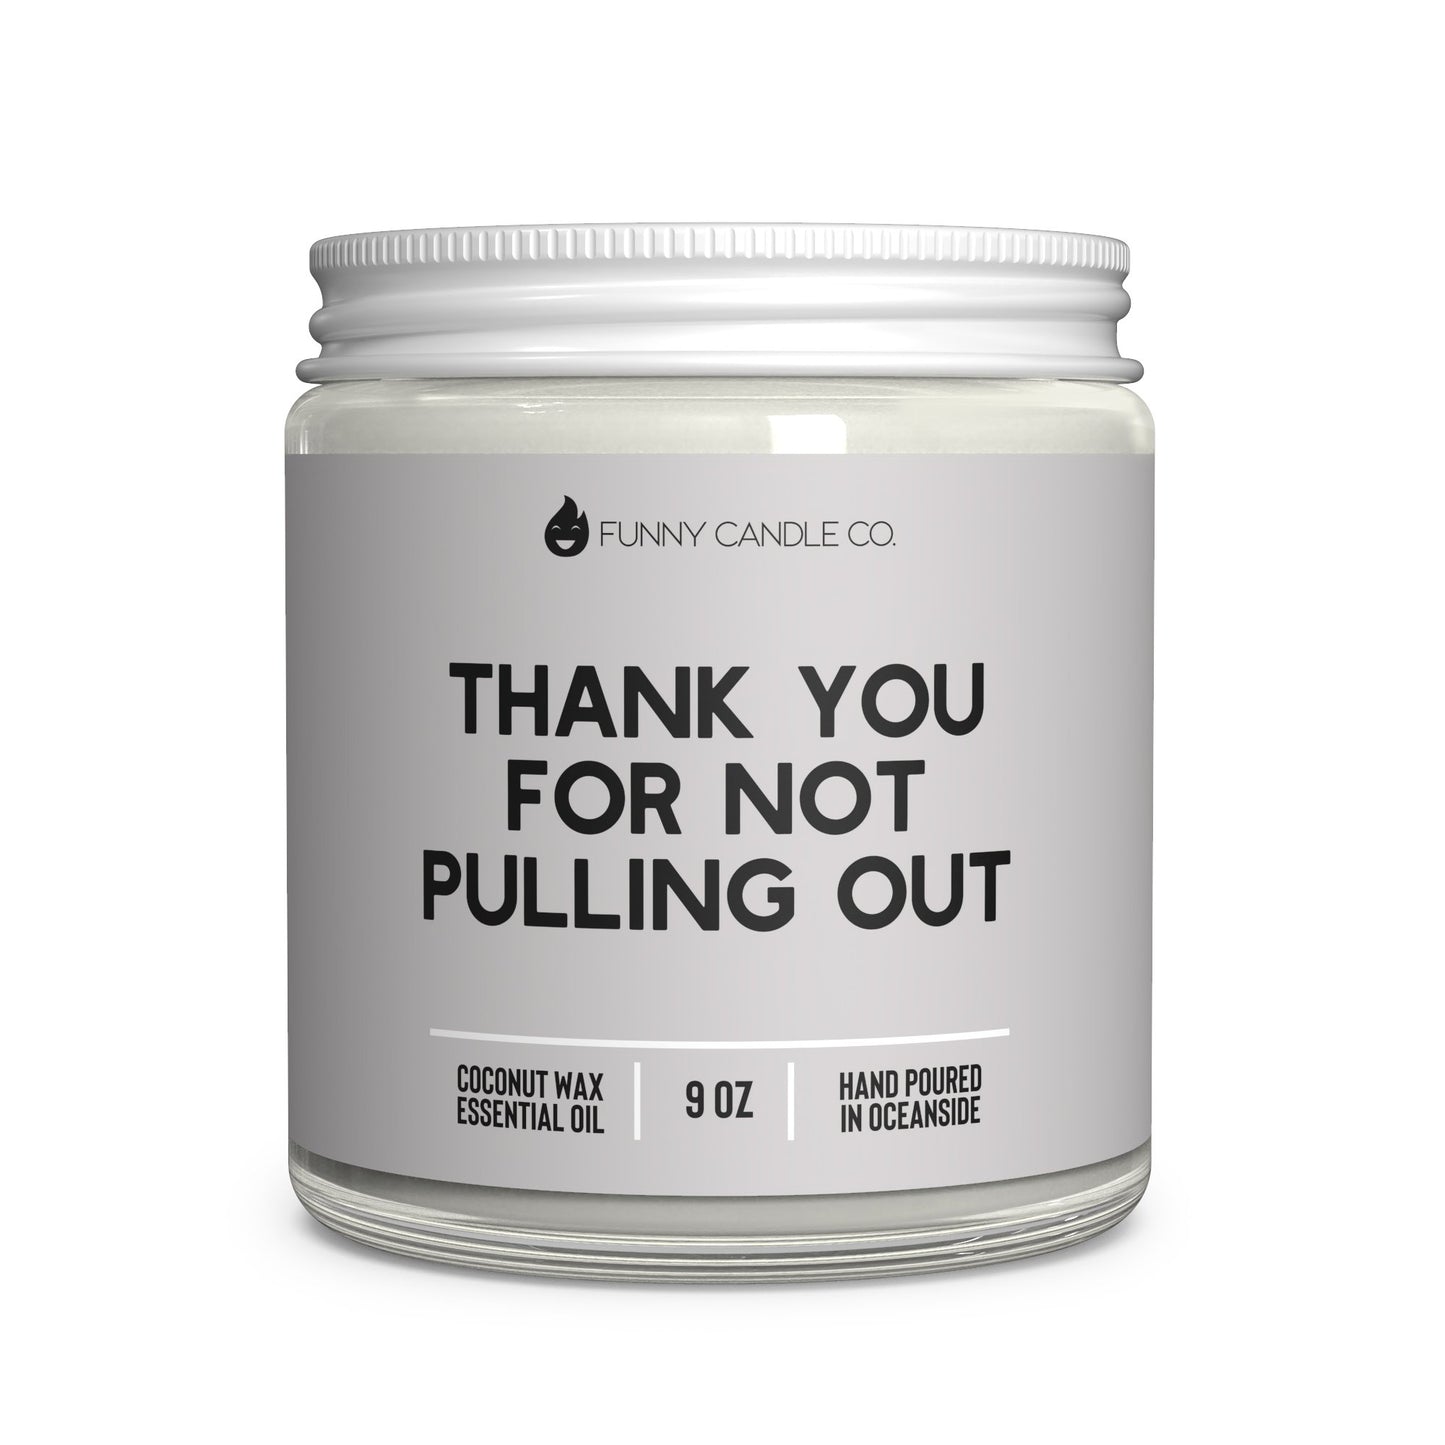 Thank You For Not Pulling Out Coconut Wax Essential Oil